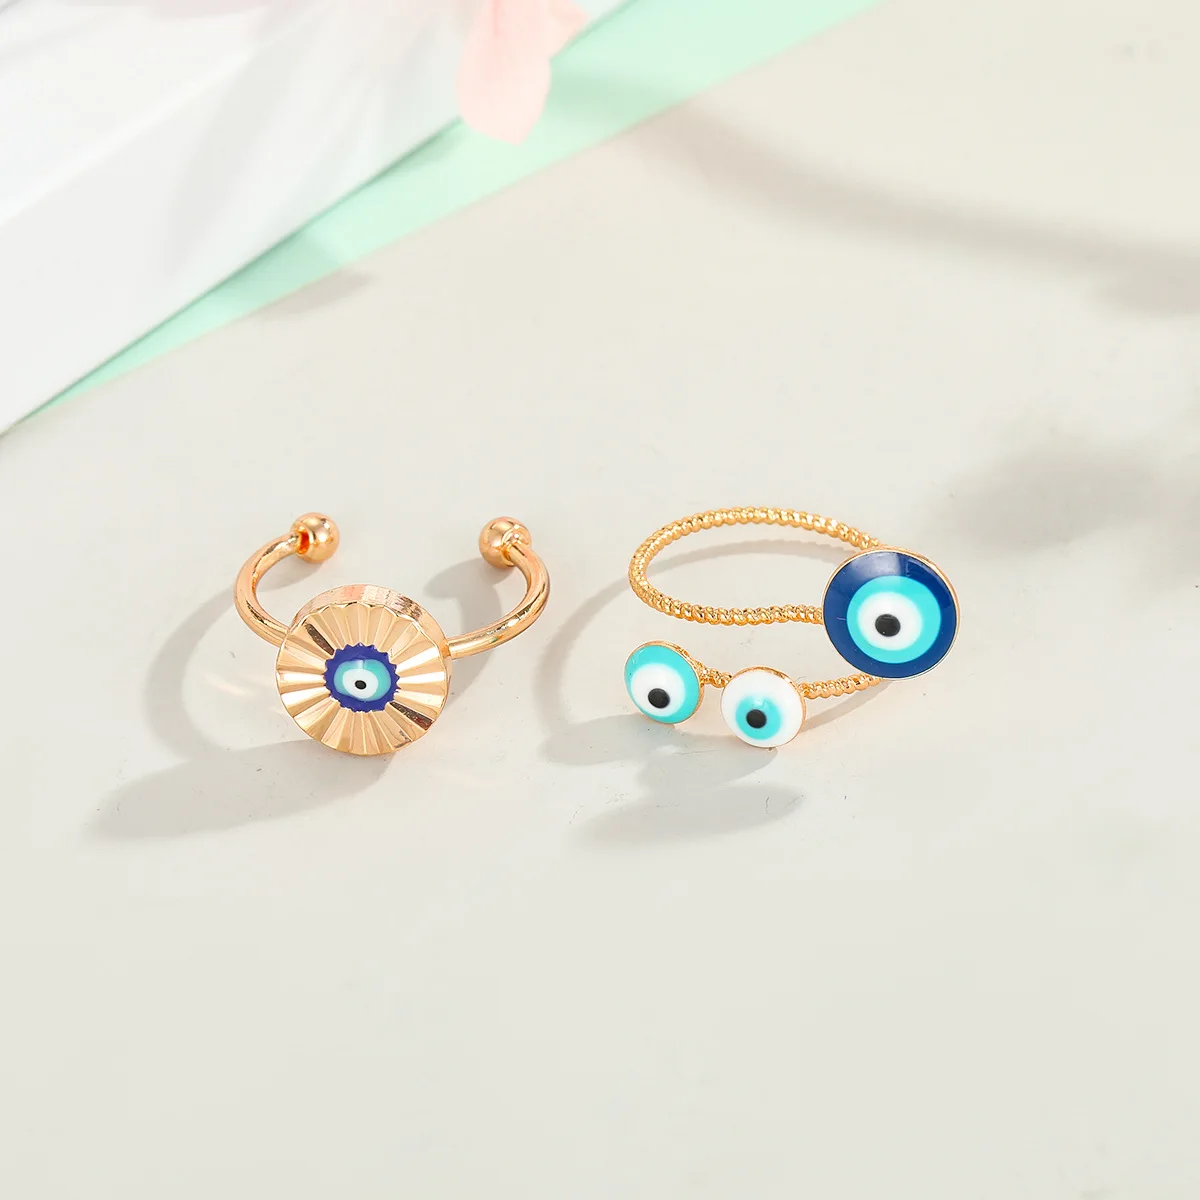 

OUYE Newest Jewelry Original Turkish Blue Eye Ring Adjustable Oil Drop Religious Ring Devil's Eye Ring Female Jewelry, Colorful